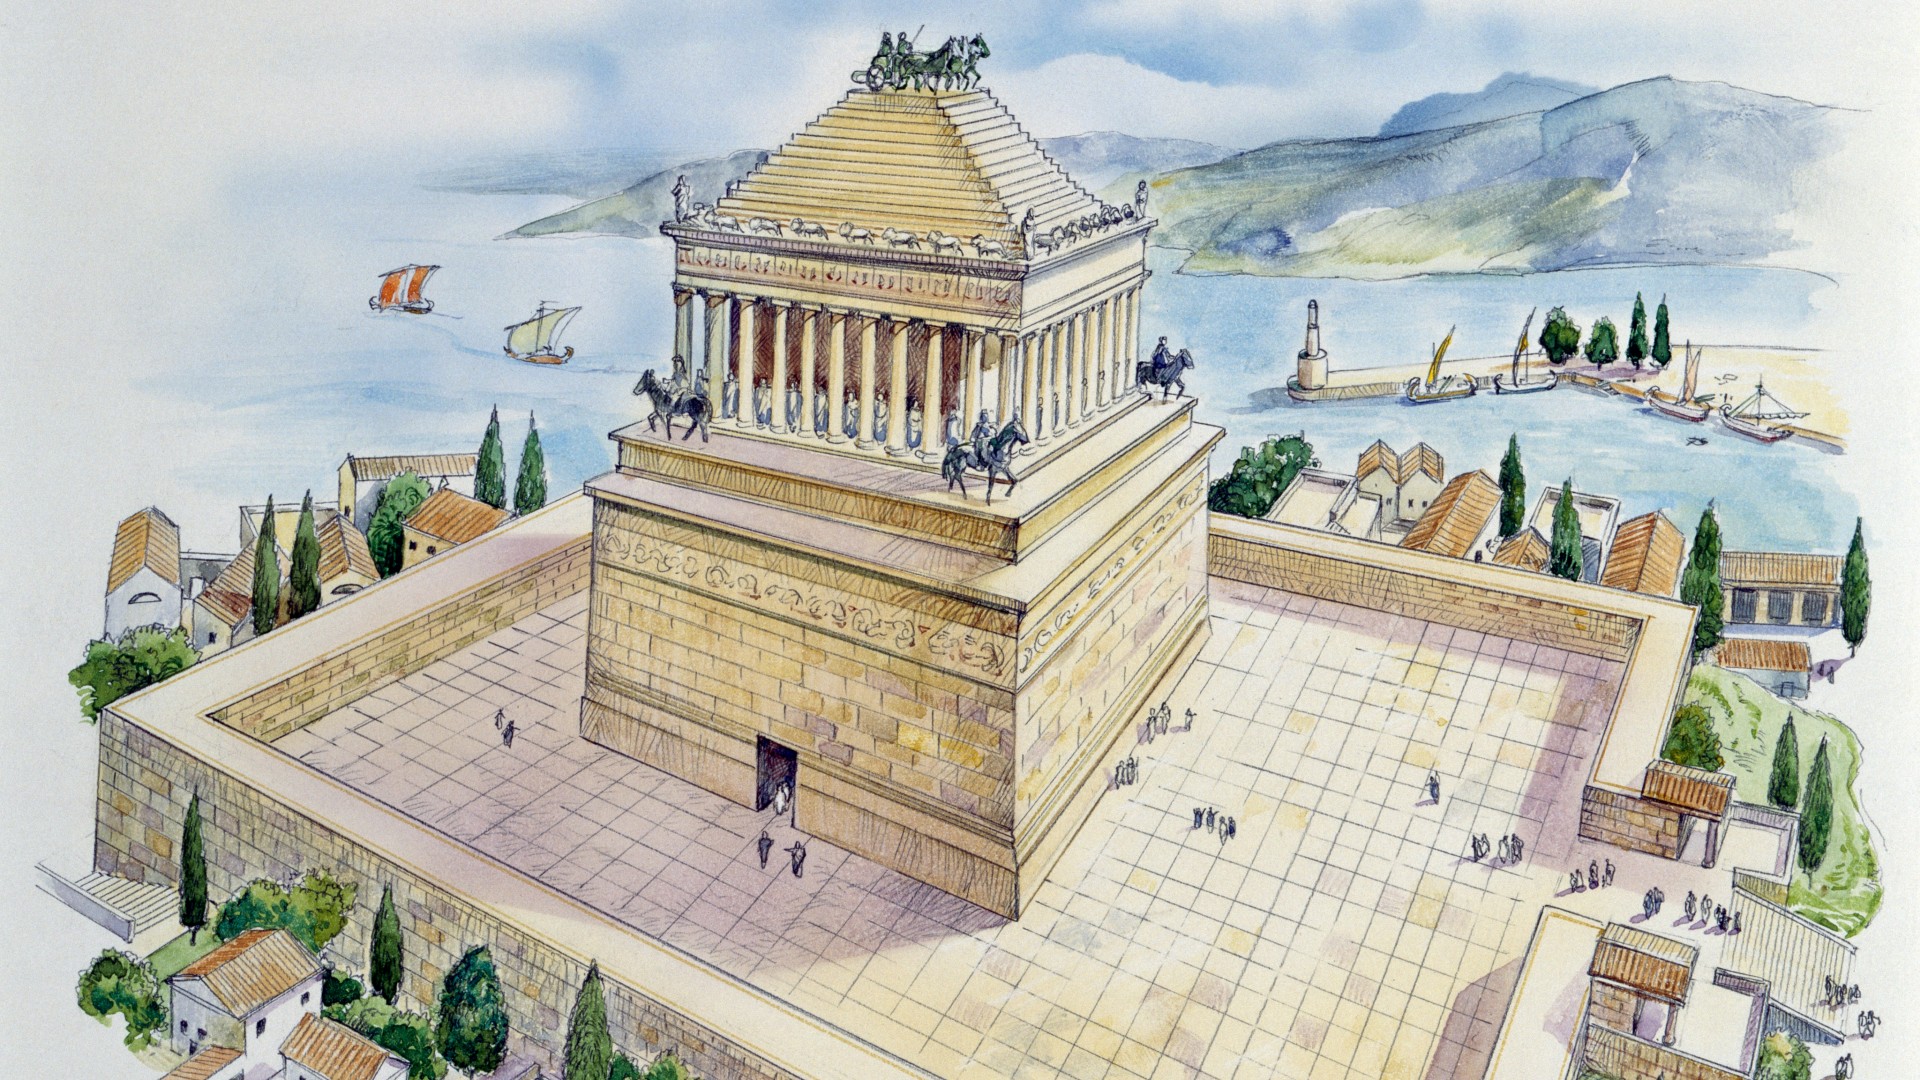 Illustration of what the Mausoleum at Halicarnassus would have looked like.